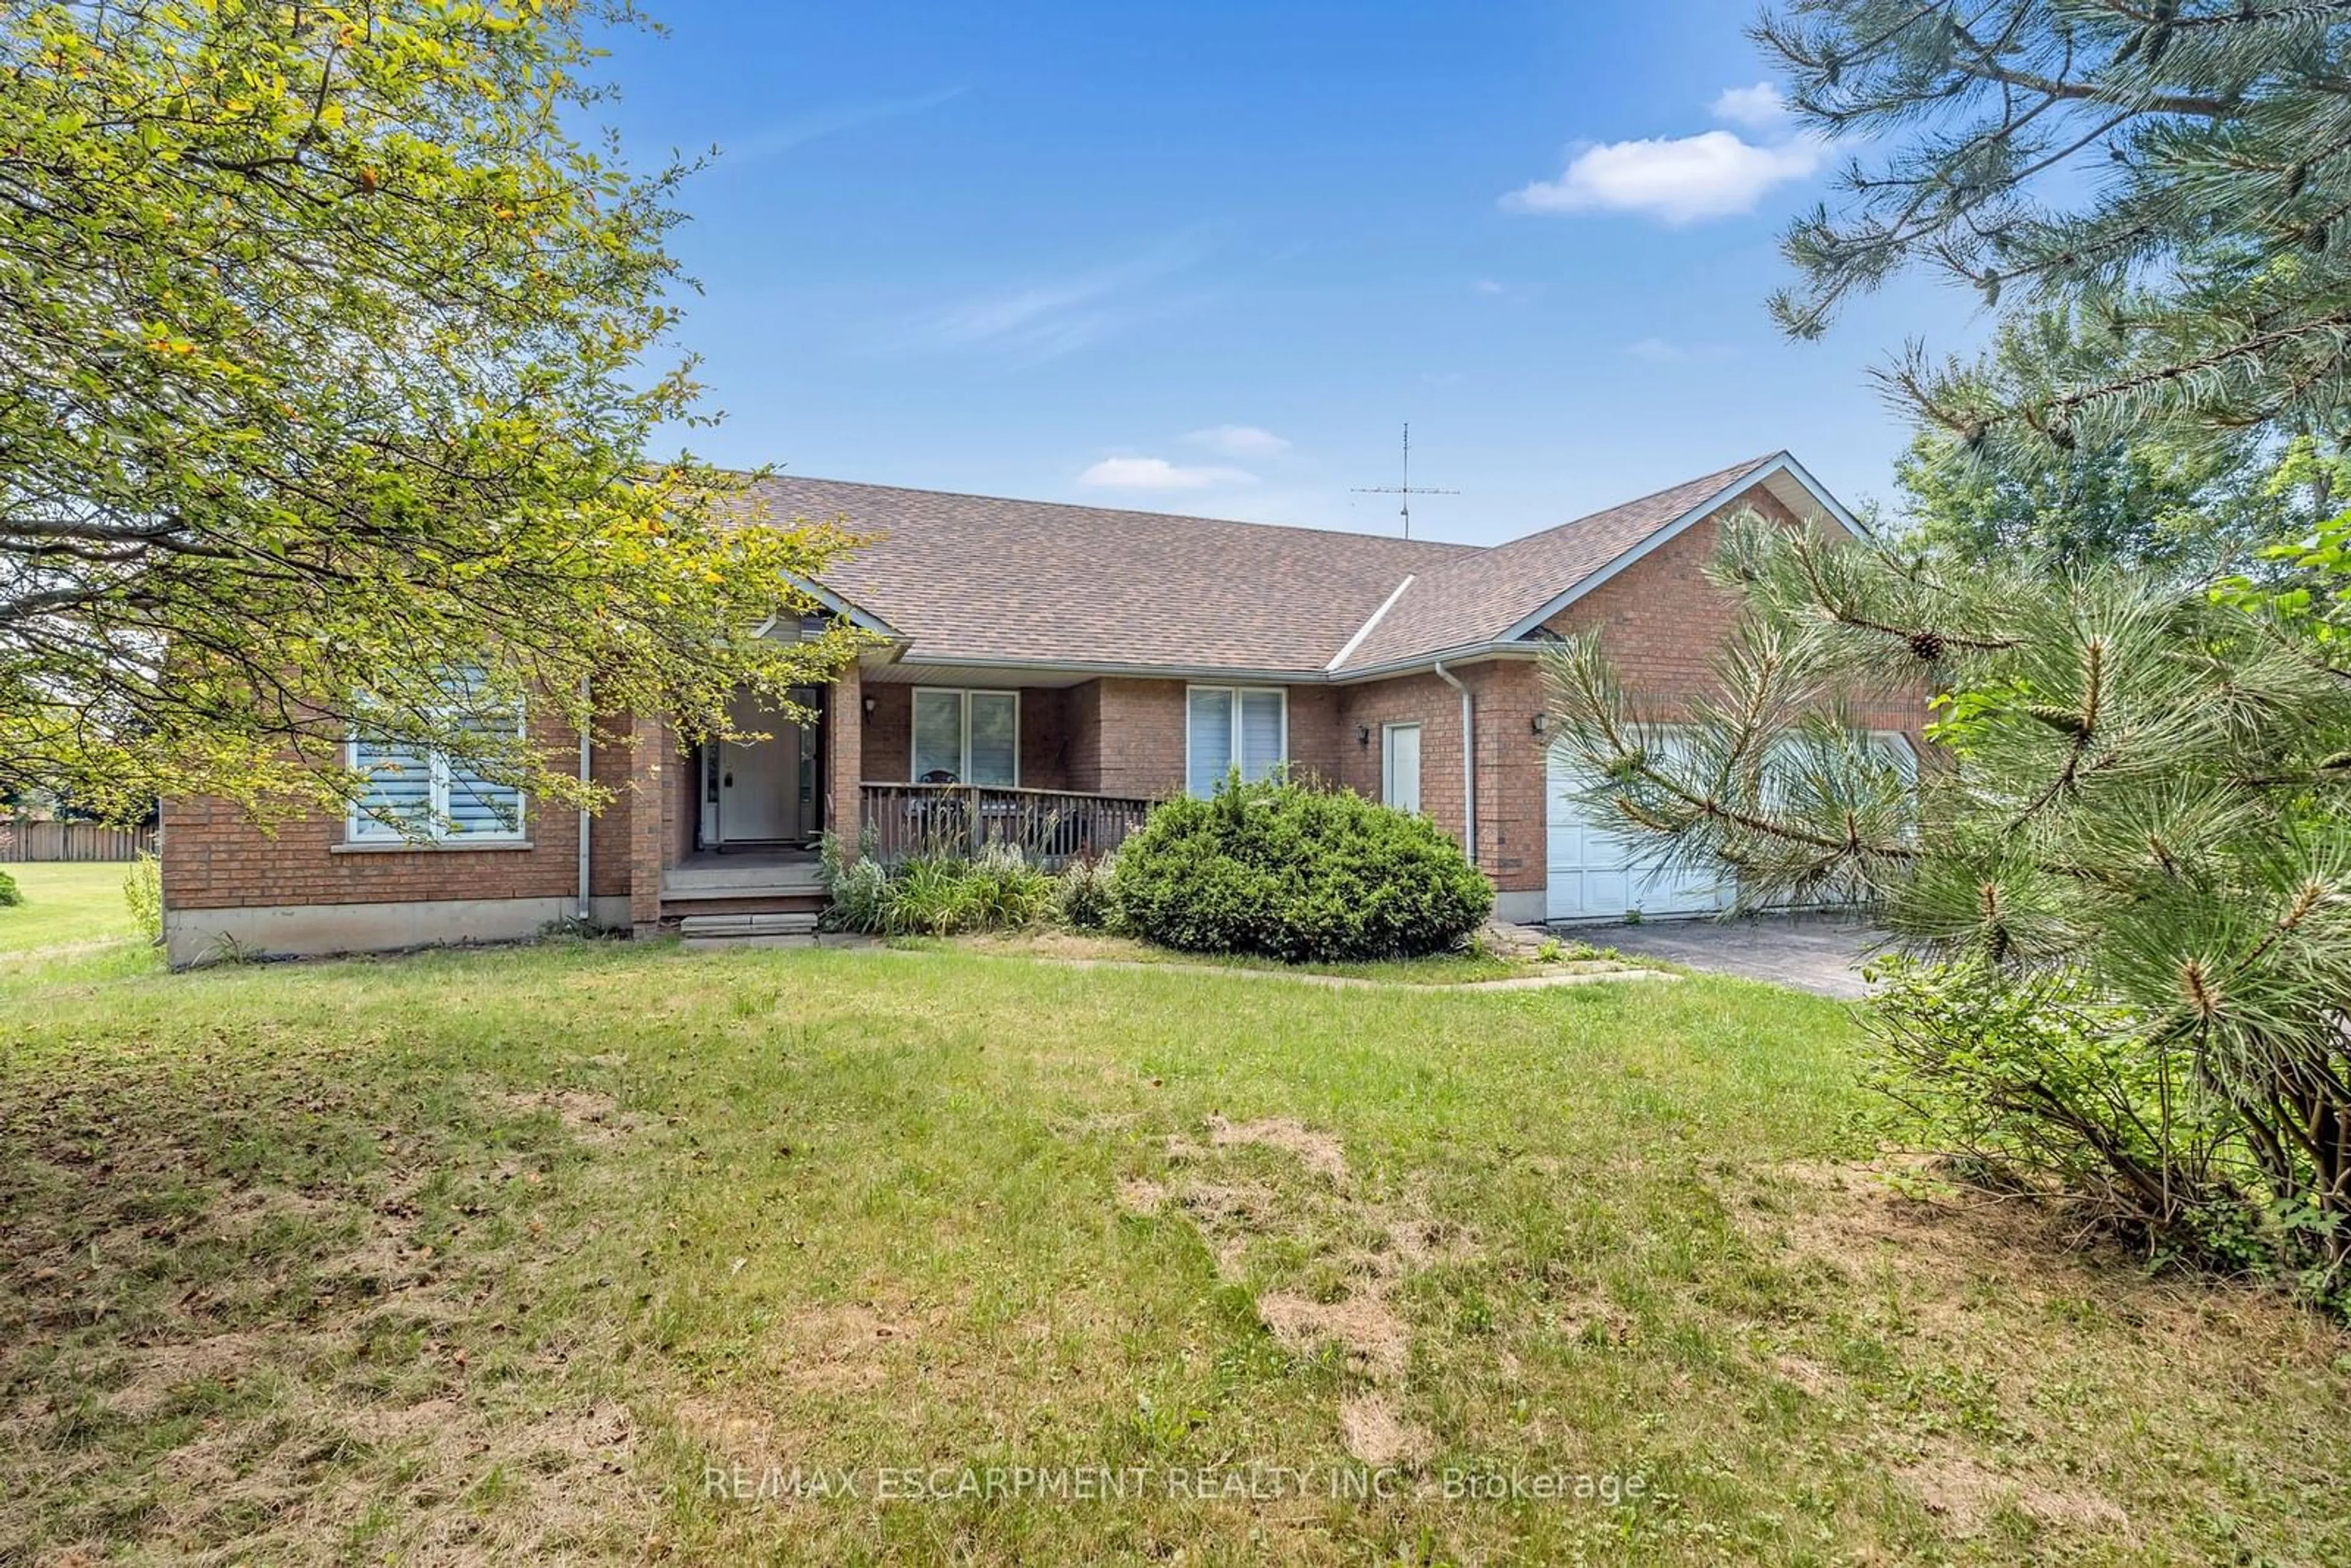 Frontside or backside of a home for 3385 Binbrook Rd, Hamilton Ontario L0R 1C0